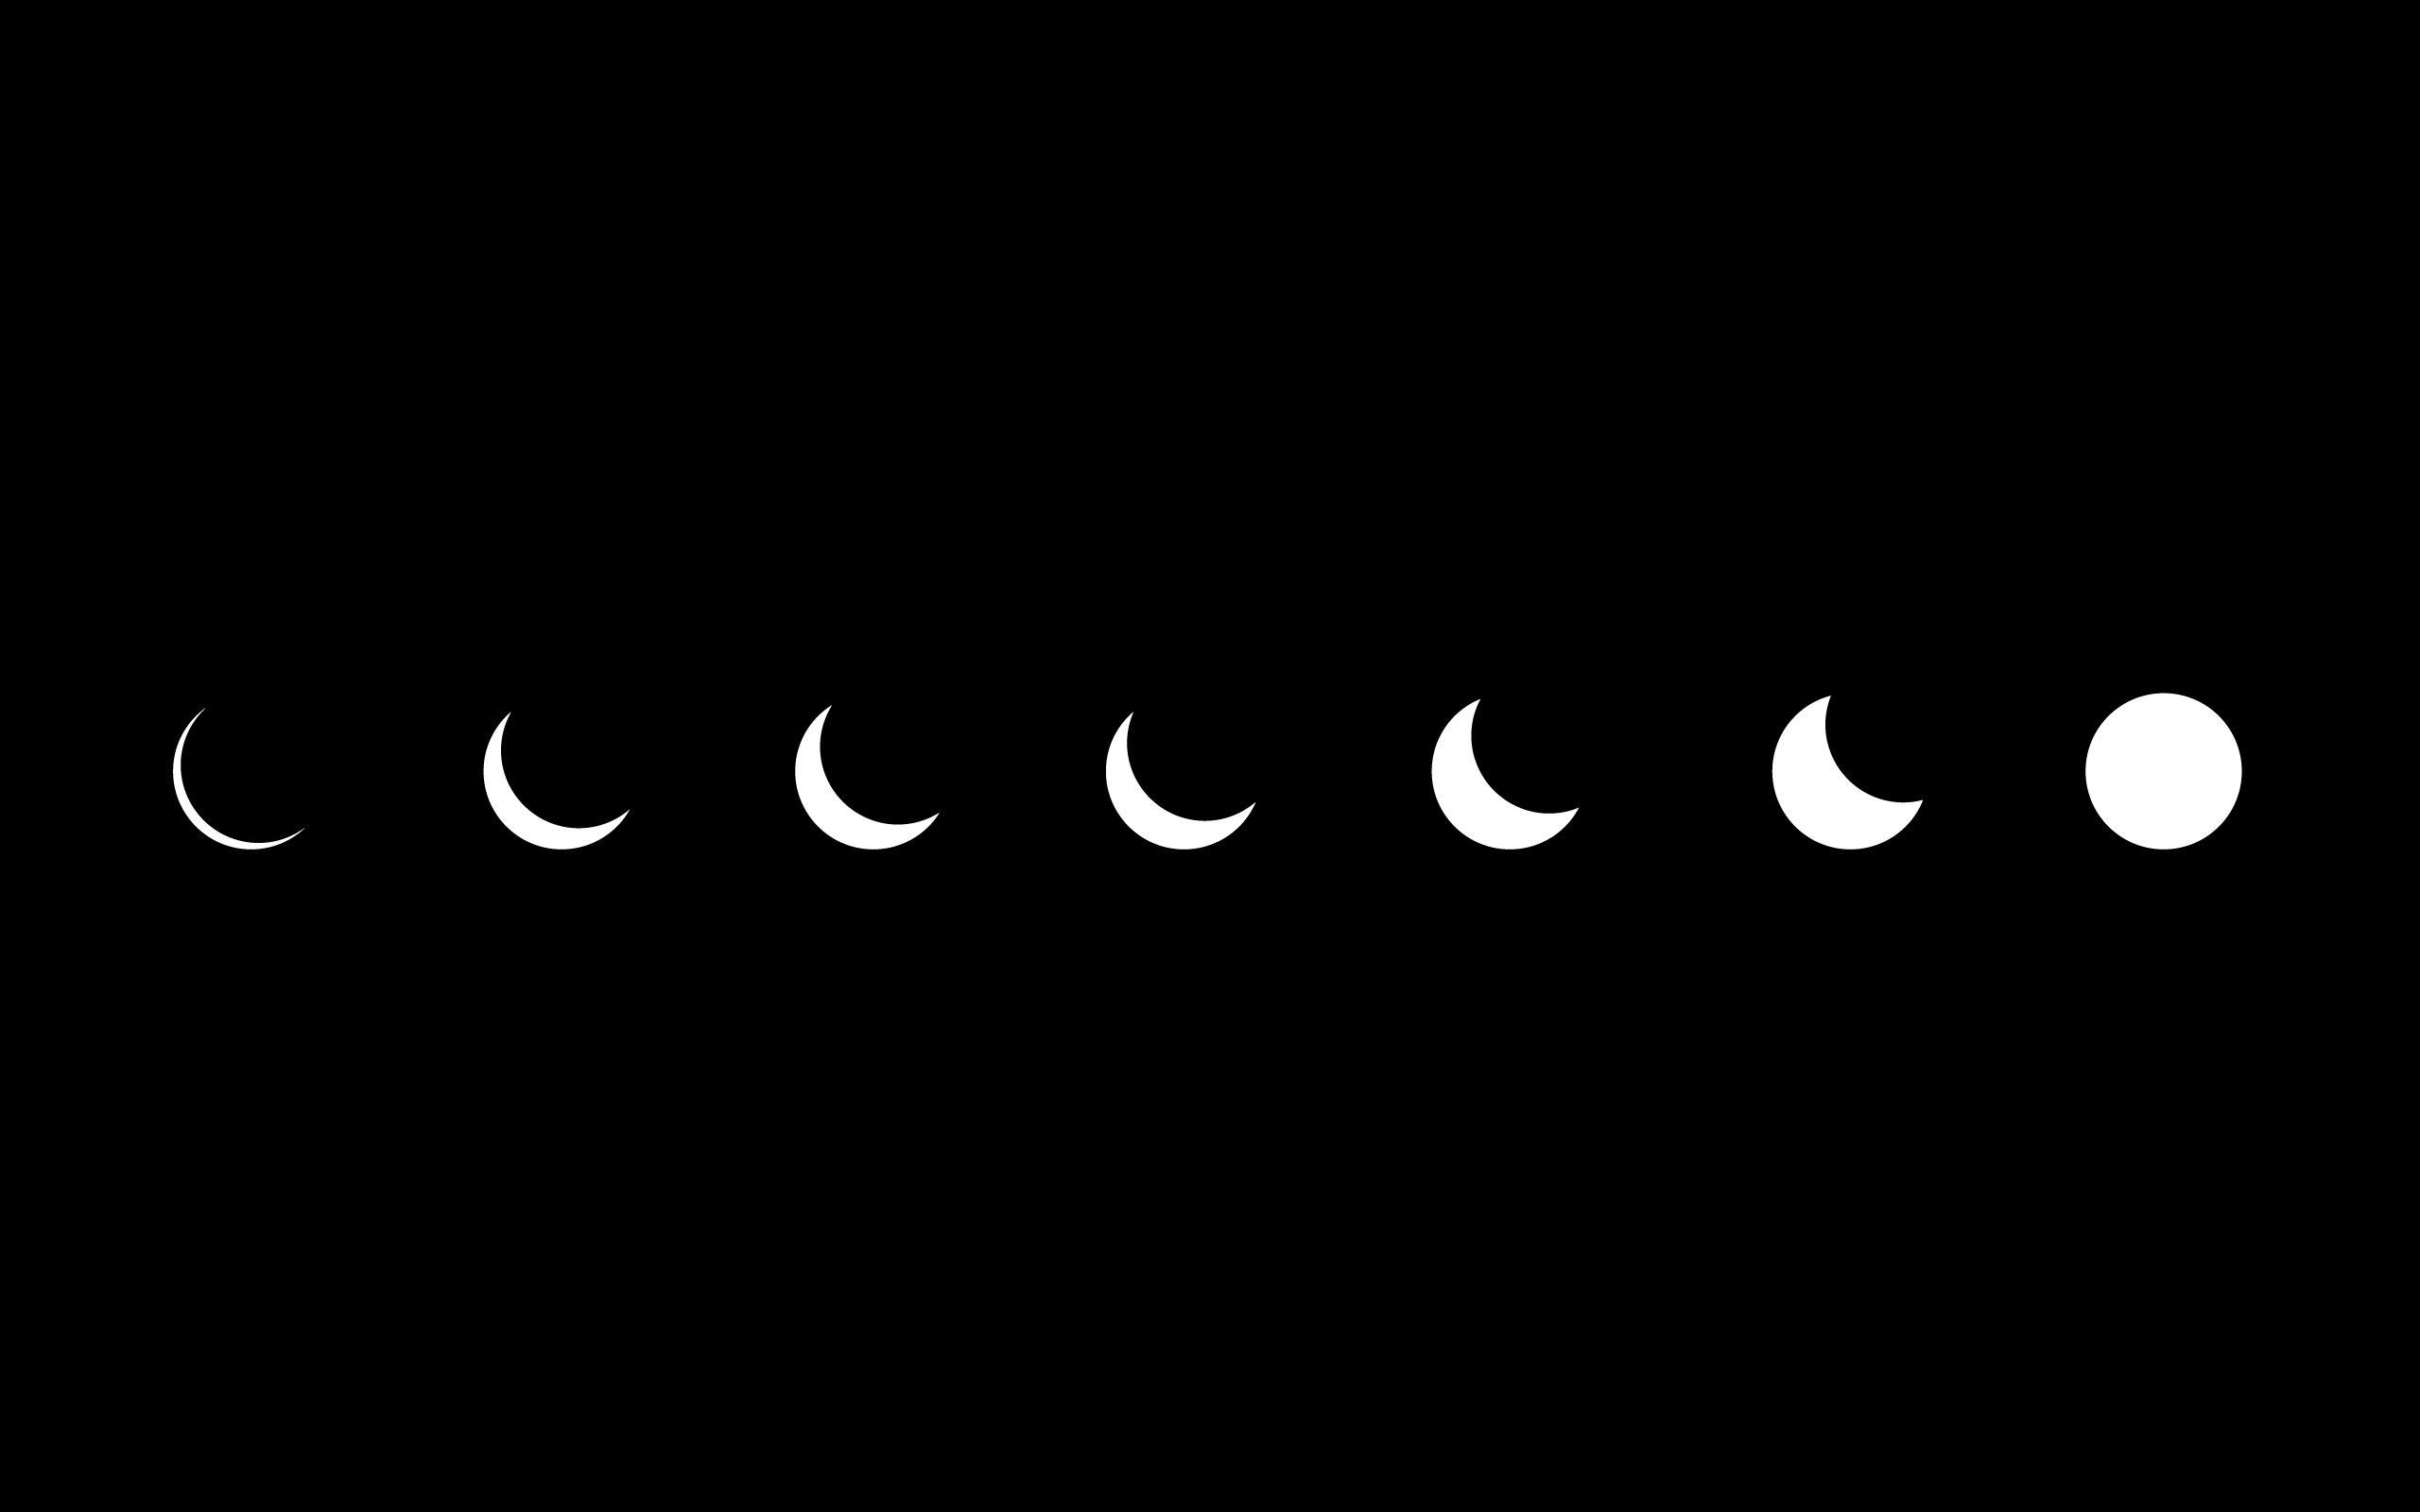 Moon Phases Poster by Rui Faria  Displate  Moon phases art Black  aesthetic wallpaper Minimalist wallpaper